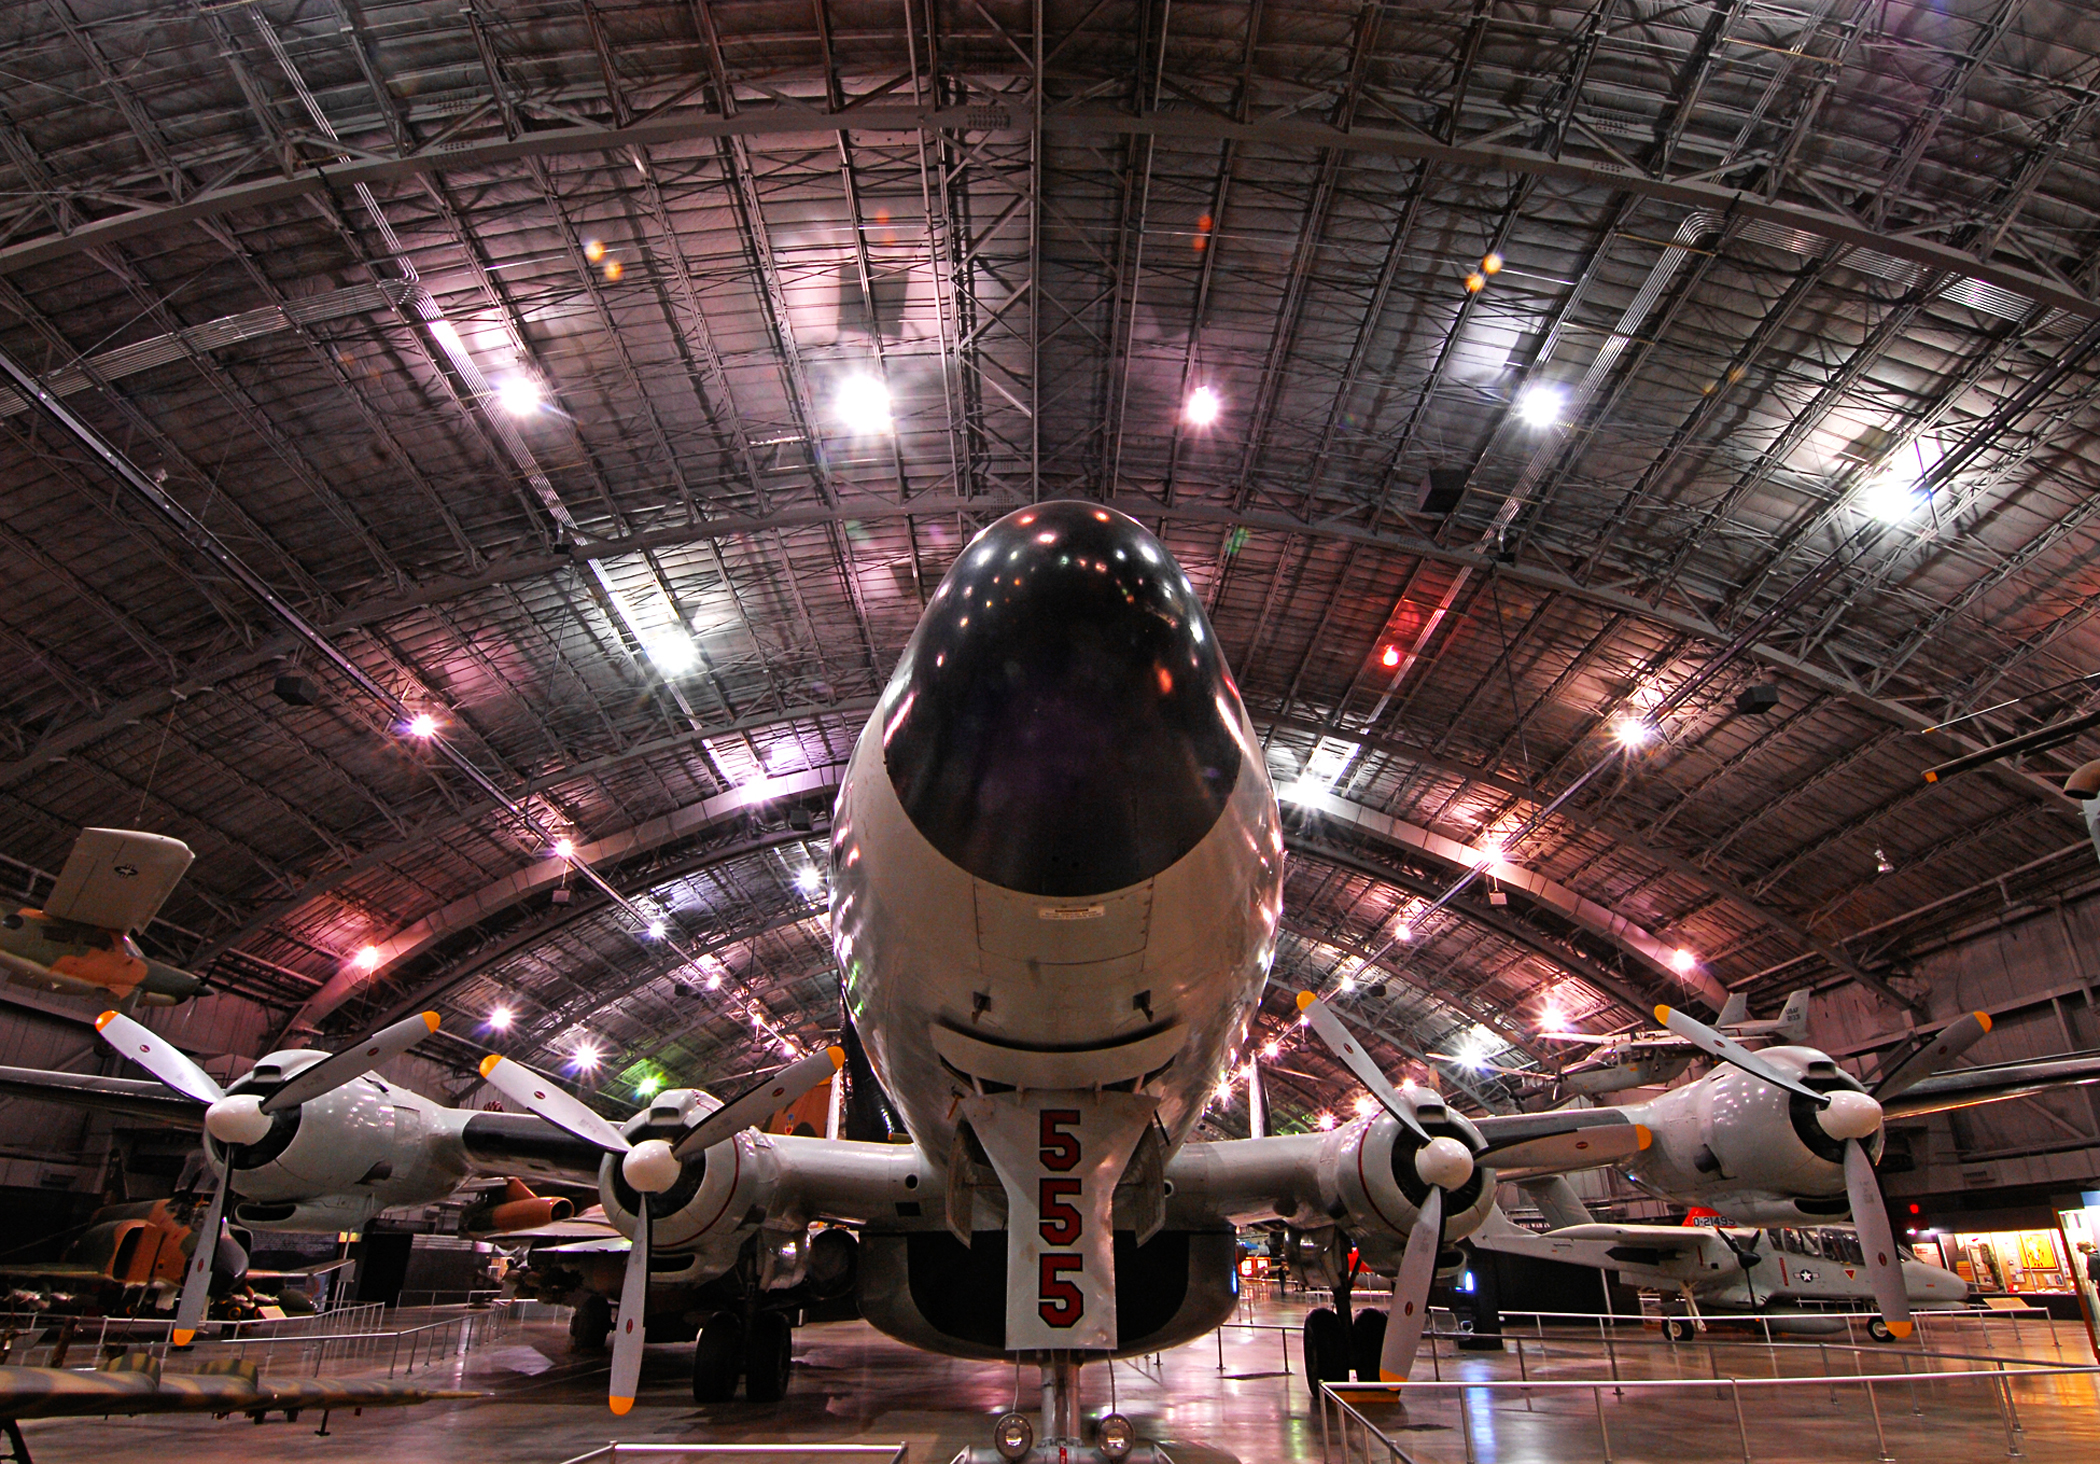 AIRFORCE MUSEUM